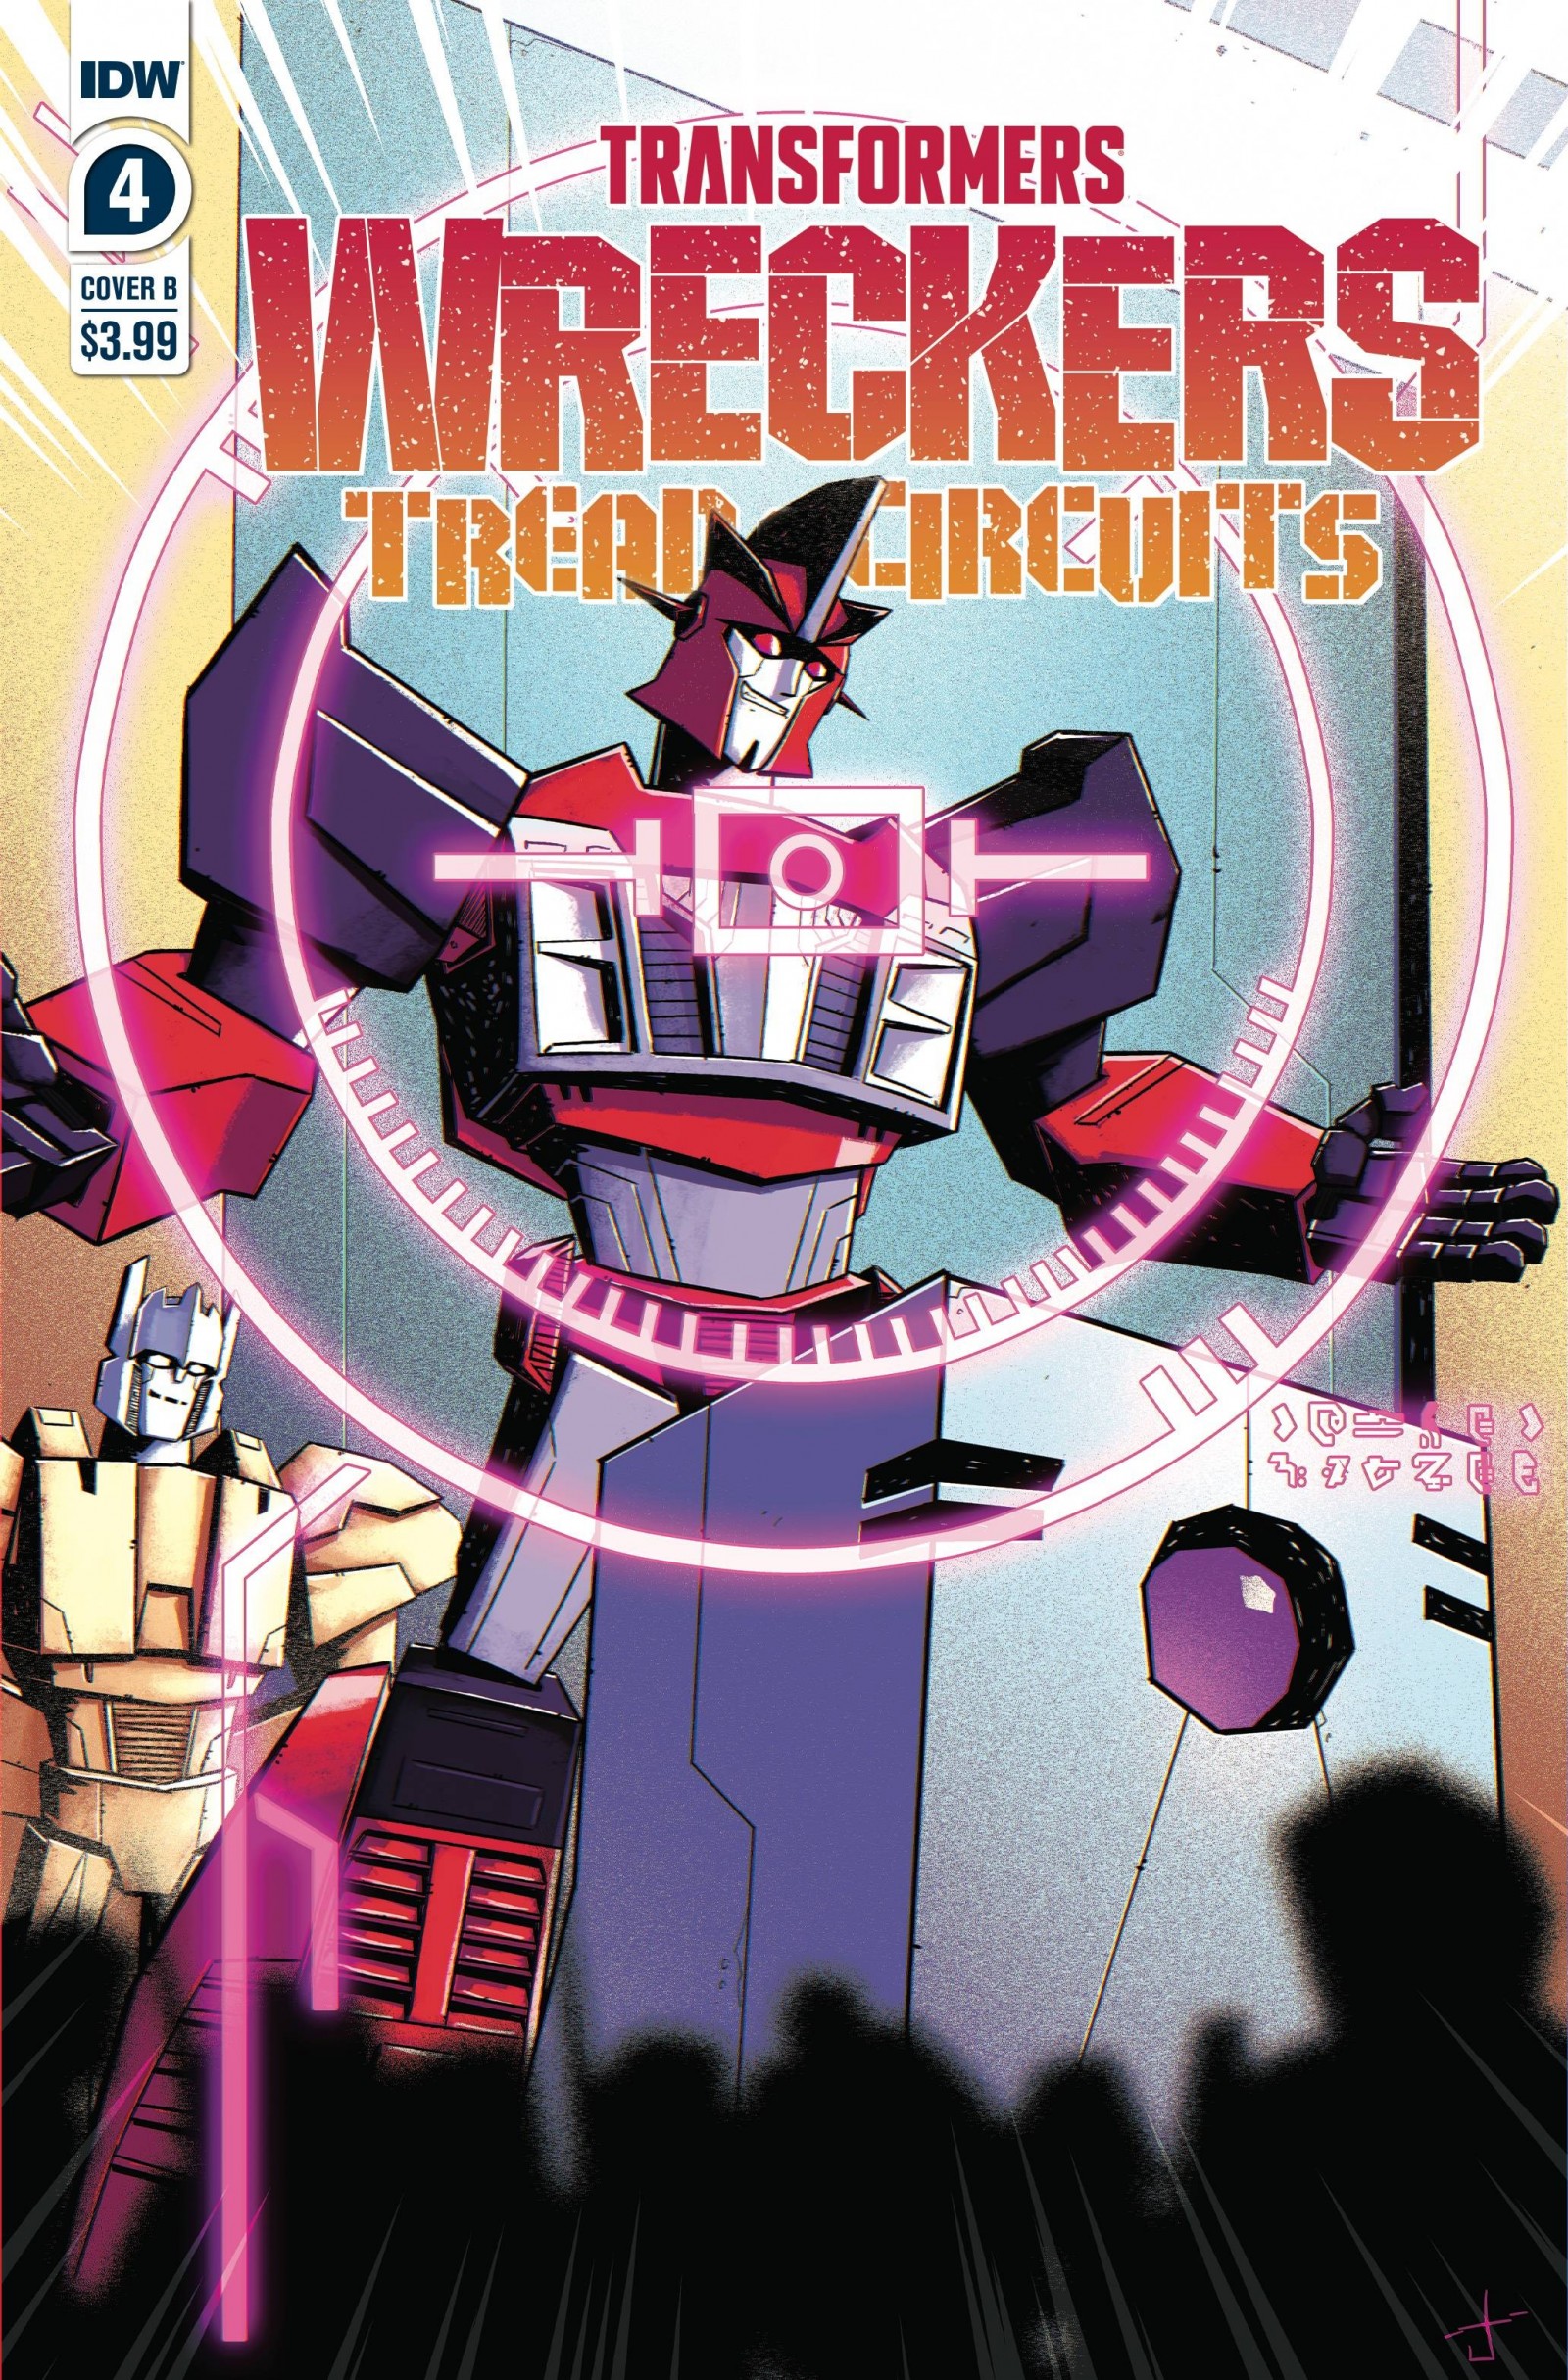 Transformers News: IDW Transformers Comics Solicitations for January 2022